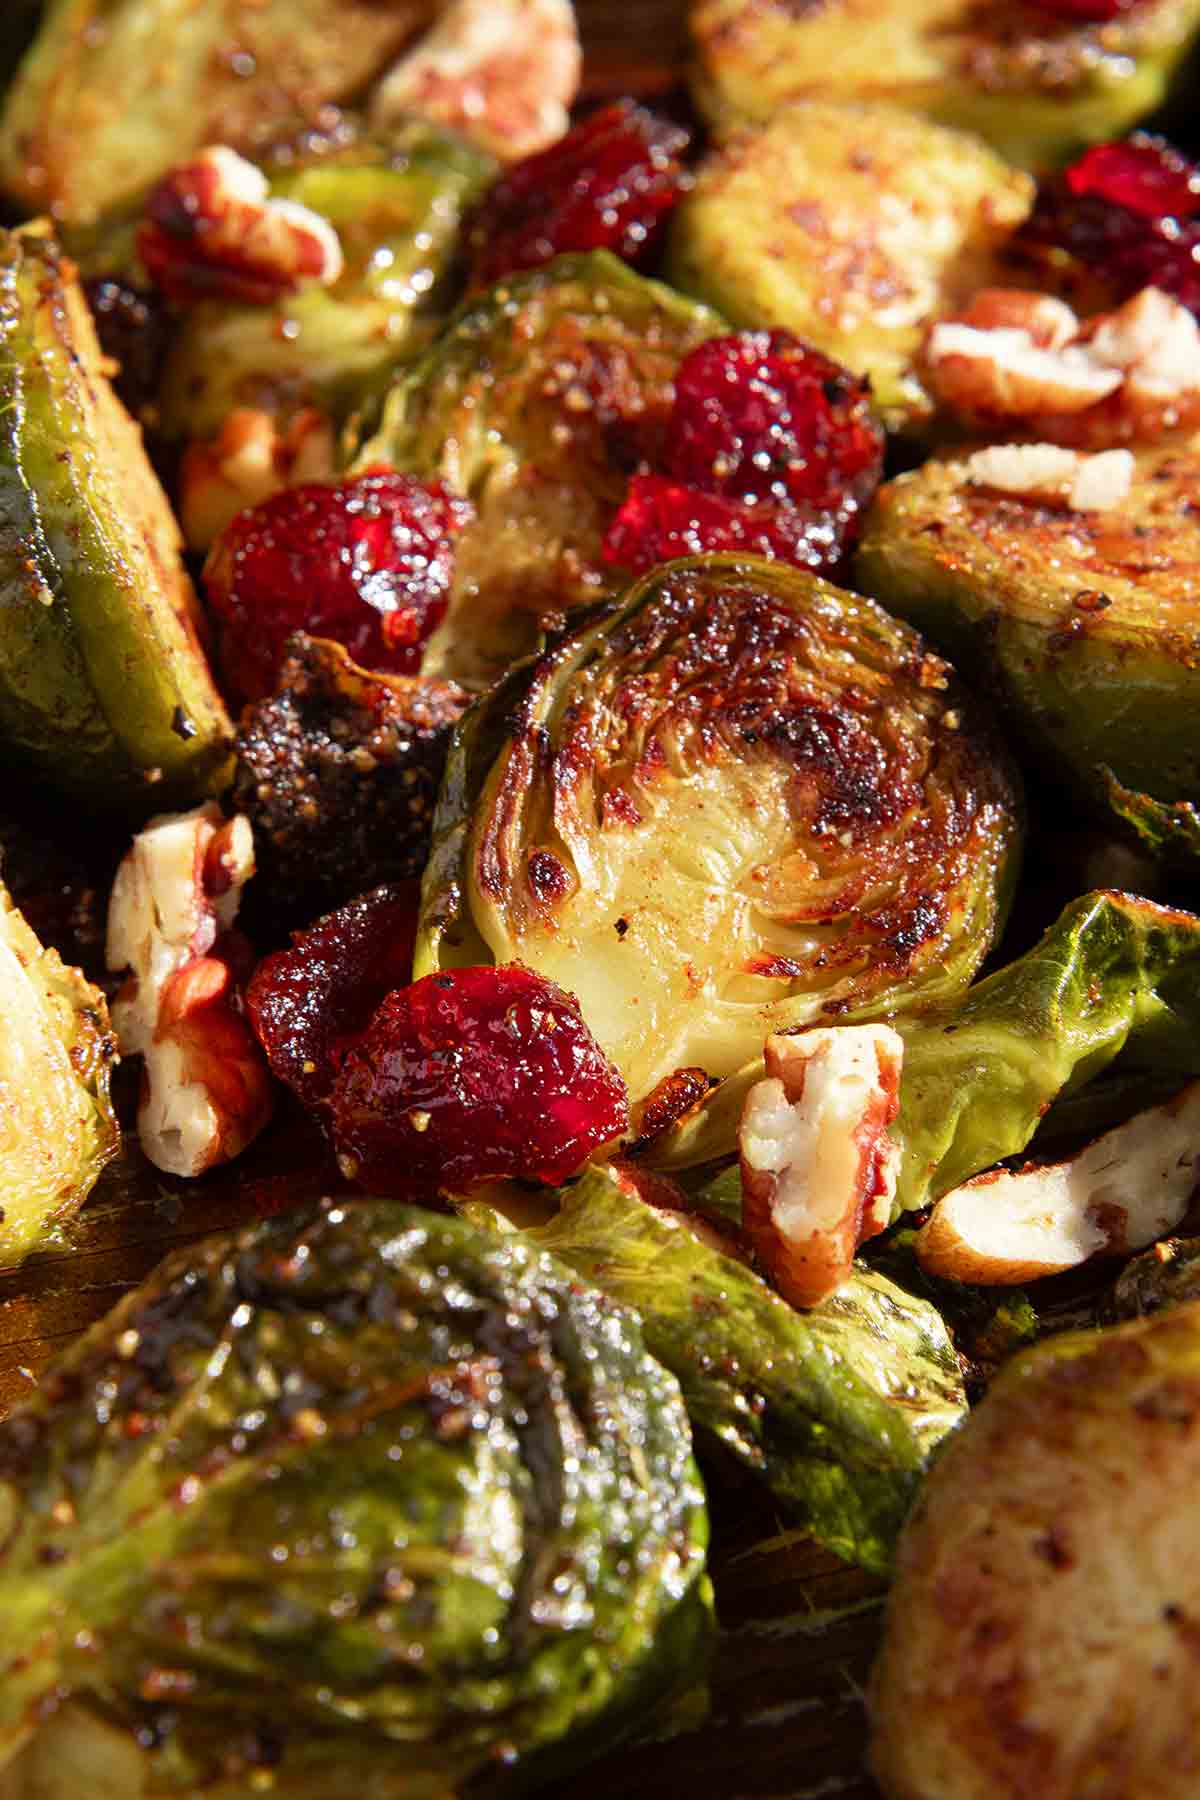 Roasted Brussels sprouts and dried cranberries.